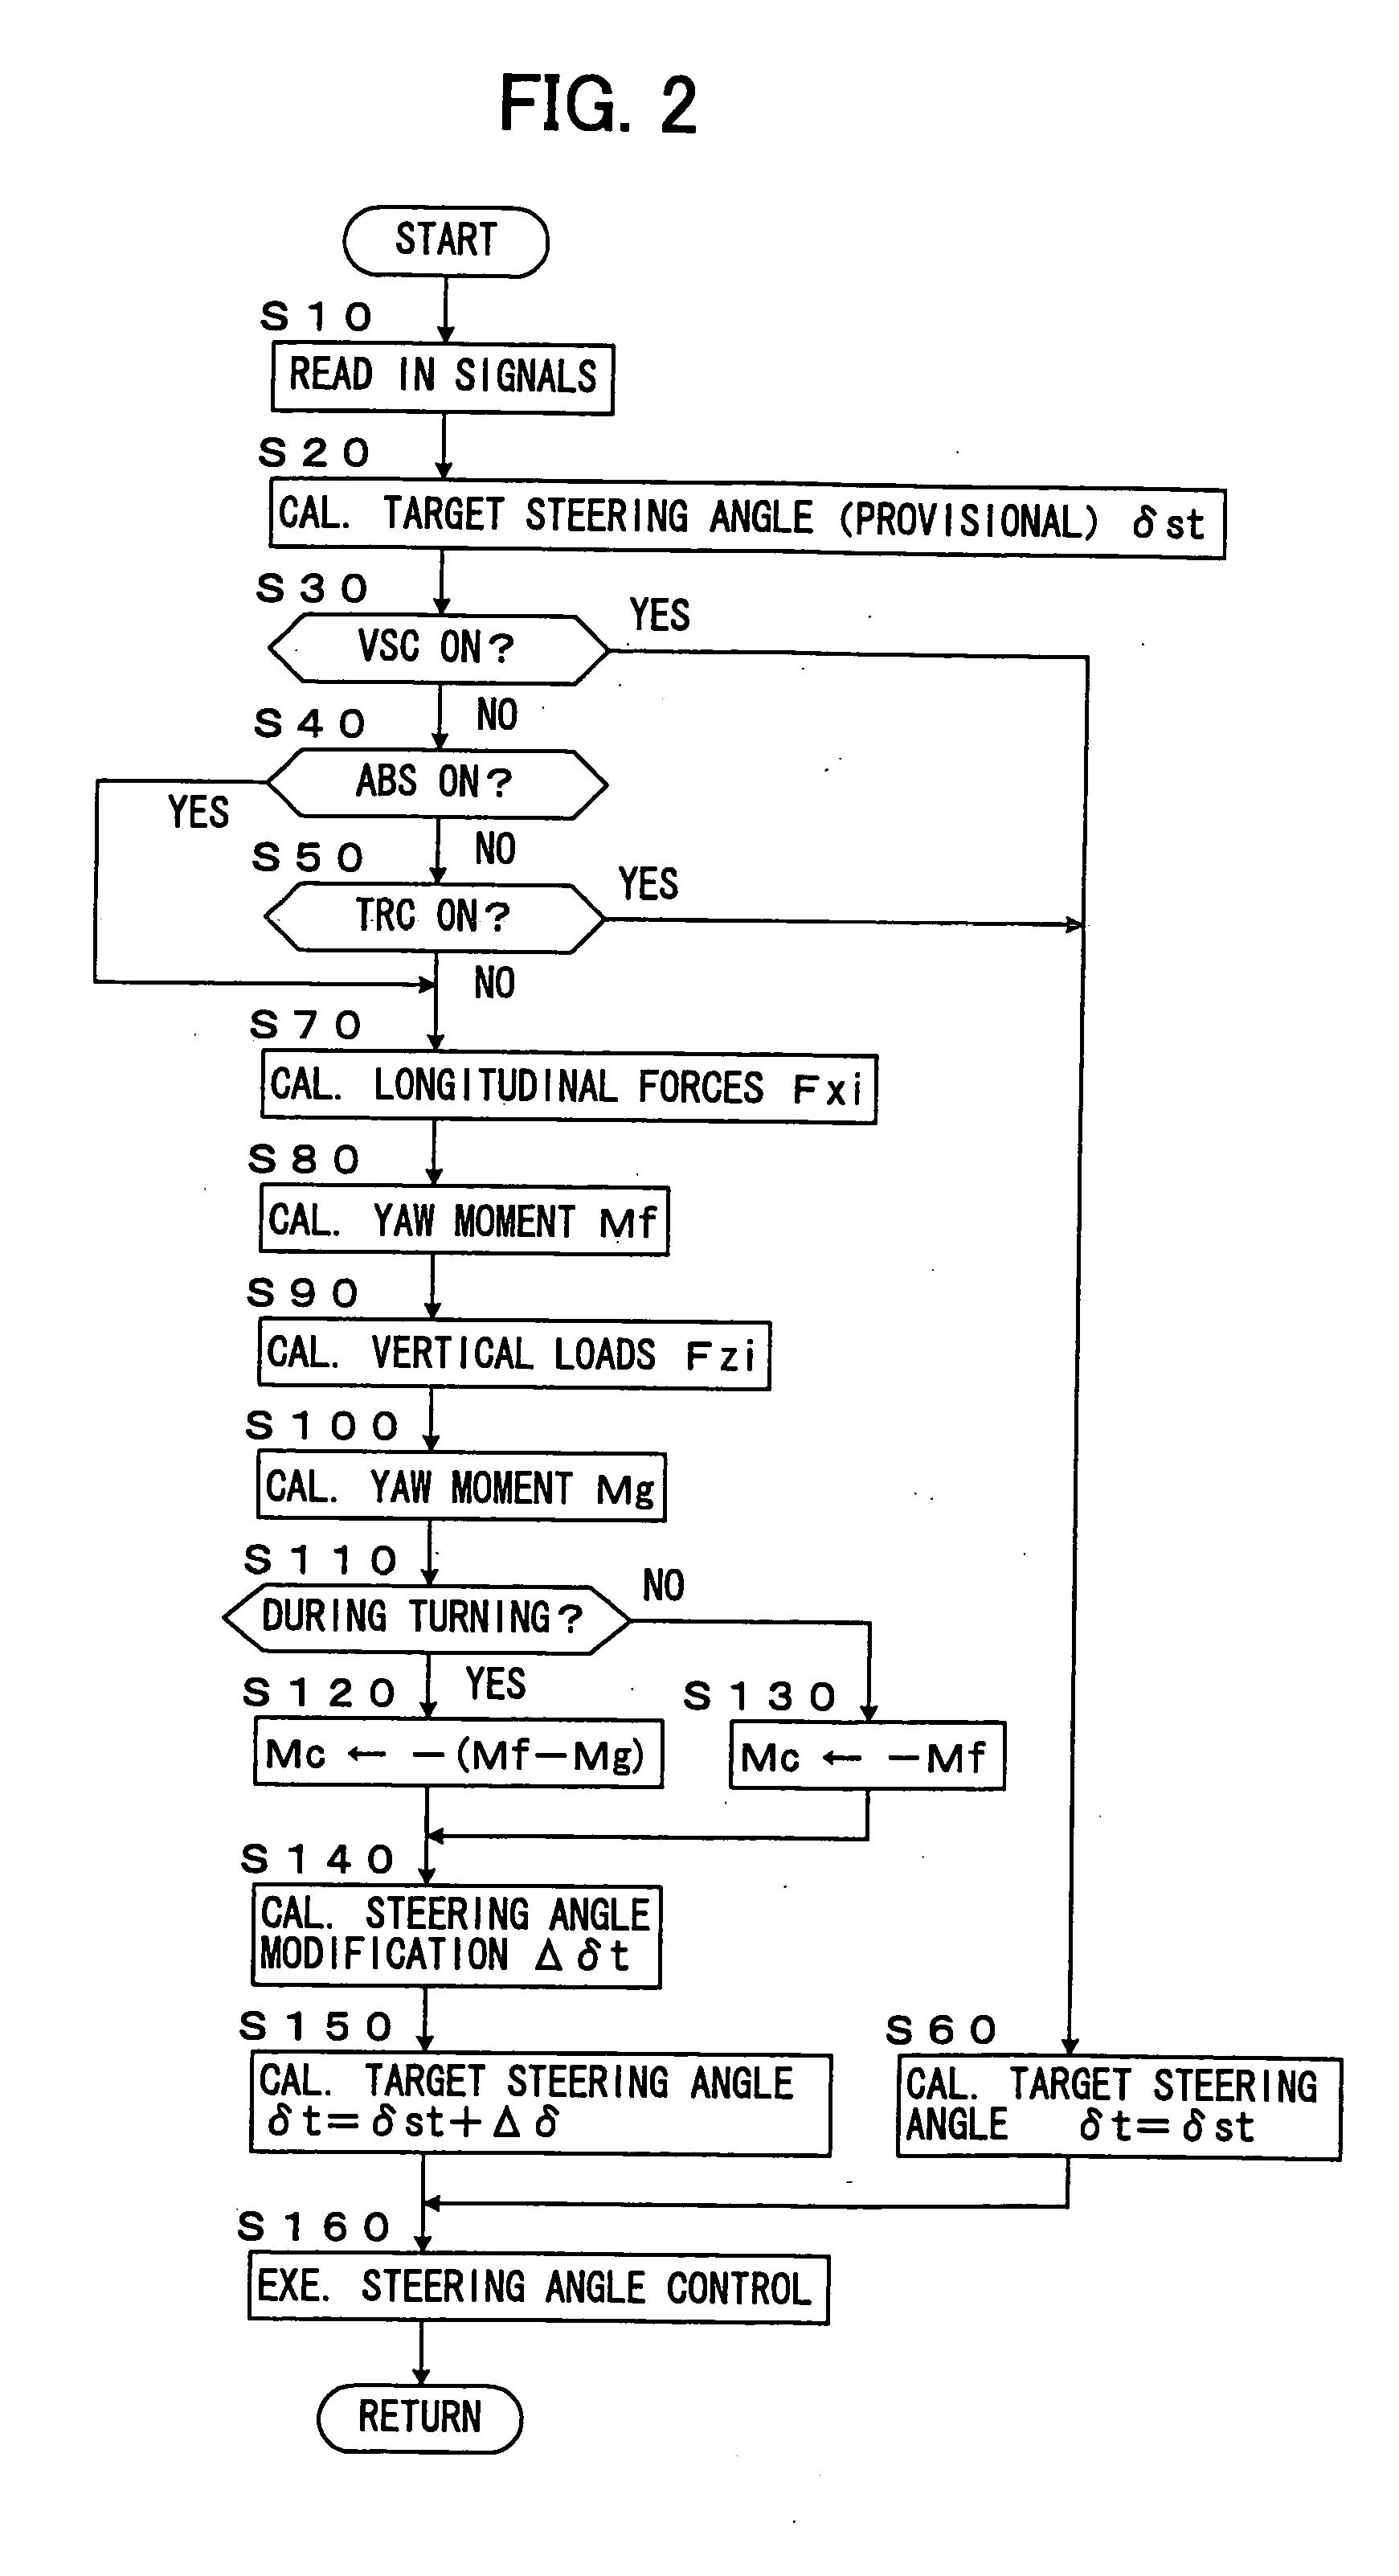 Vehicle stability control device